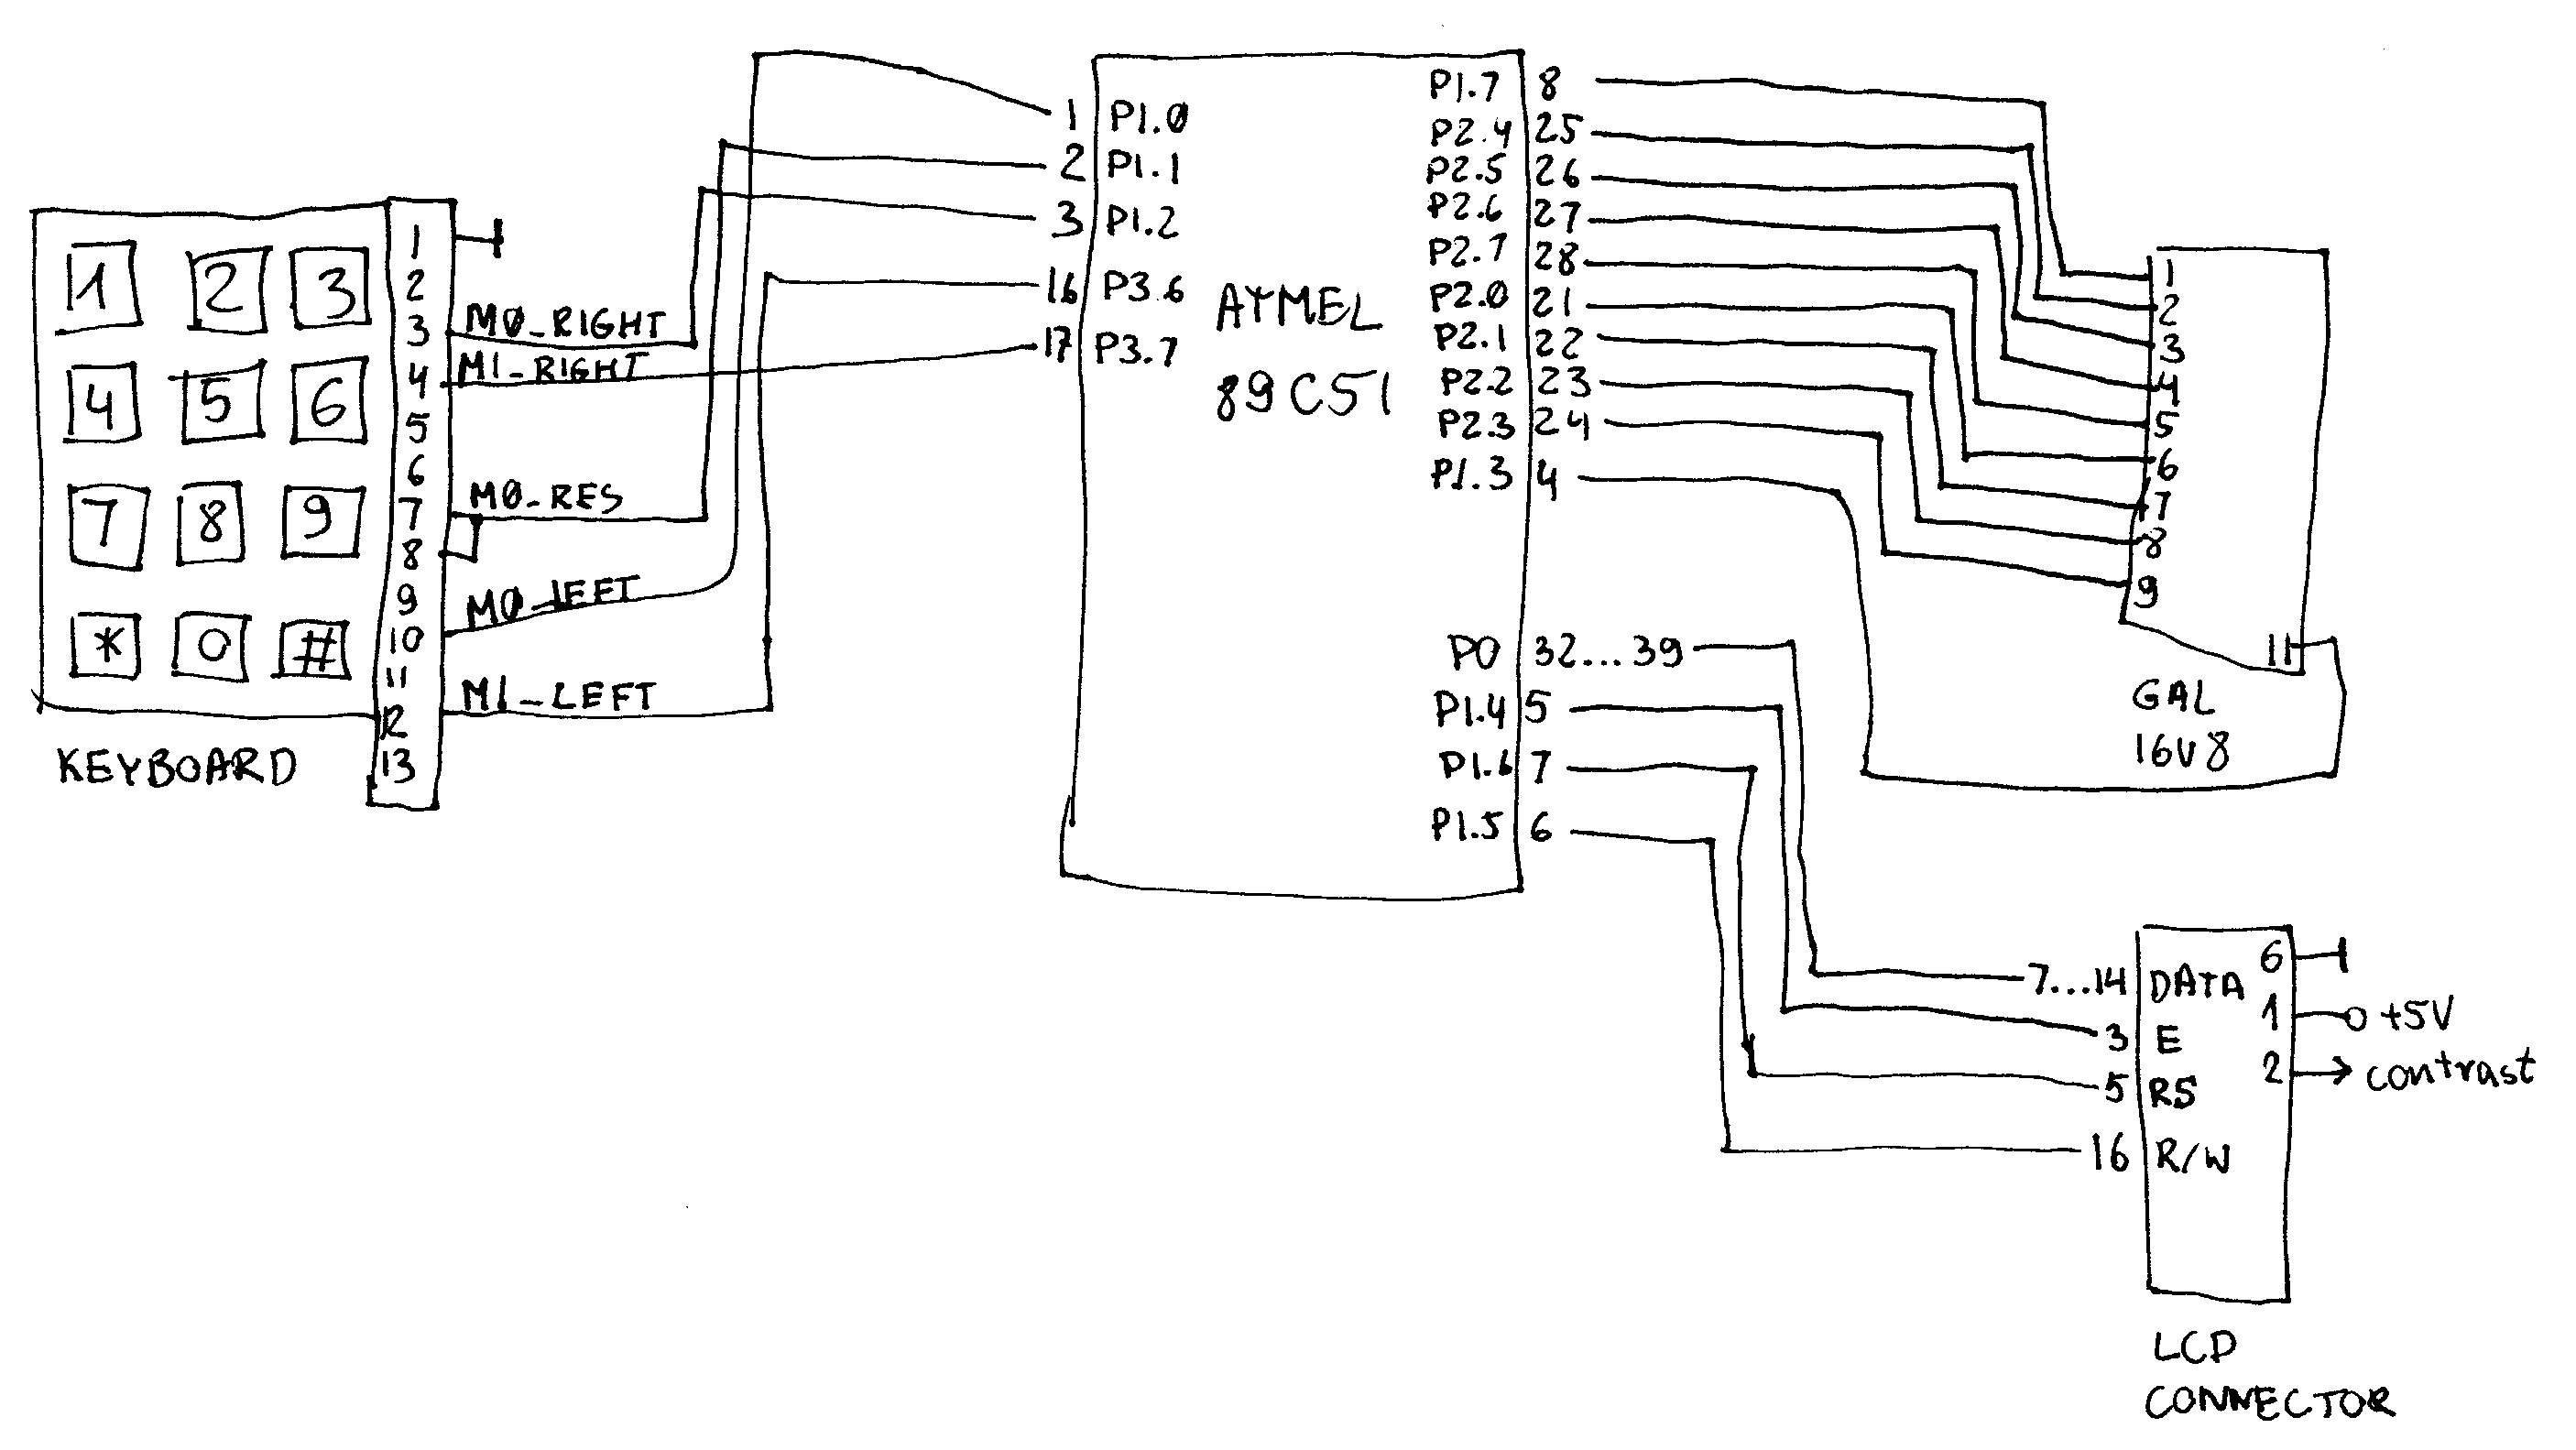 Schematic diagram of CPU section [gif, 300dpi, 57kB]